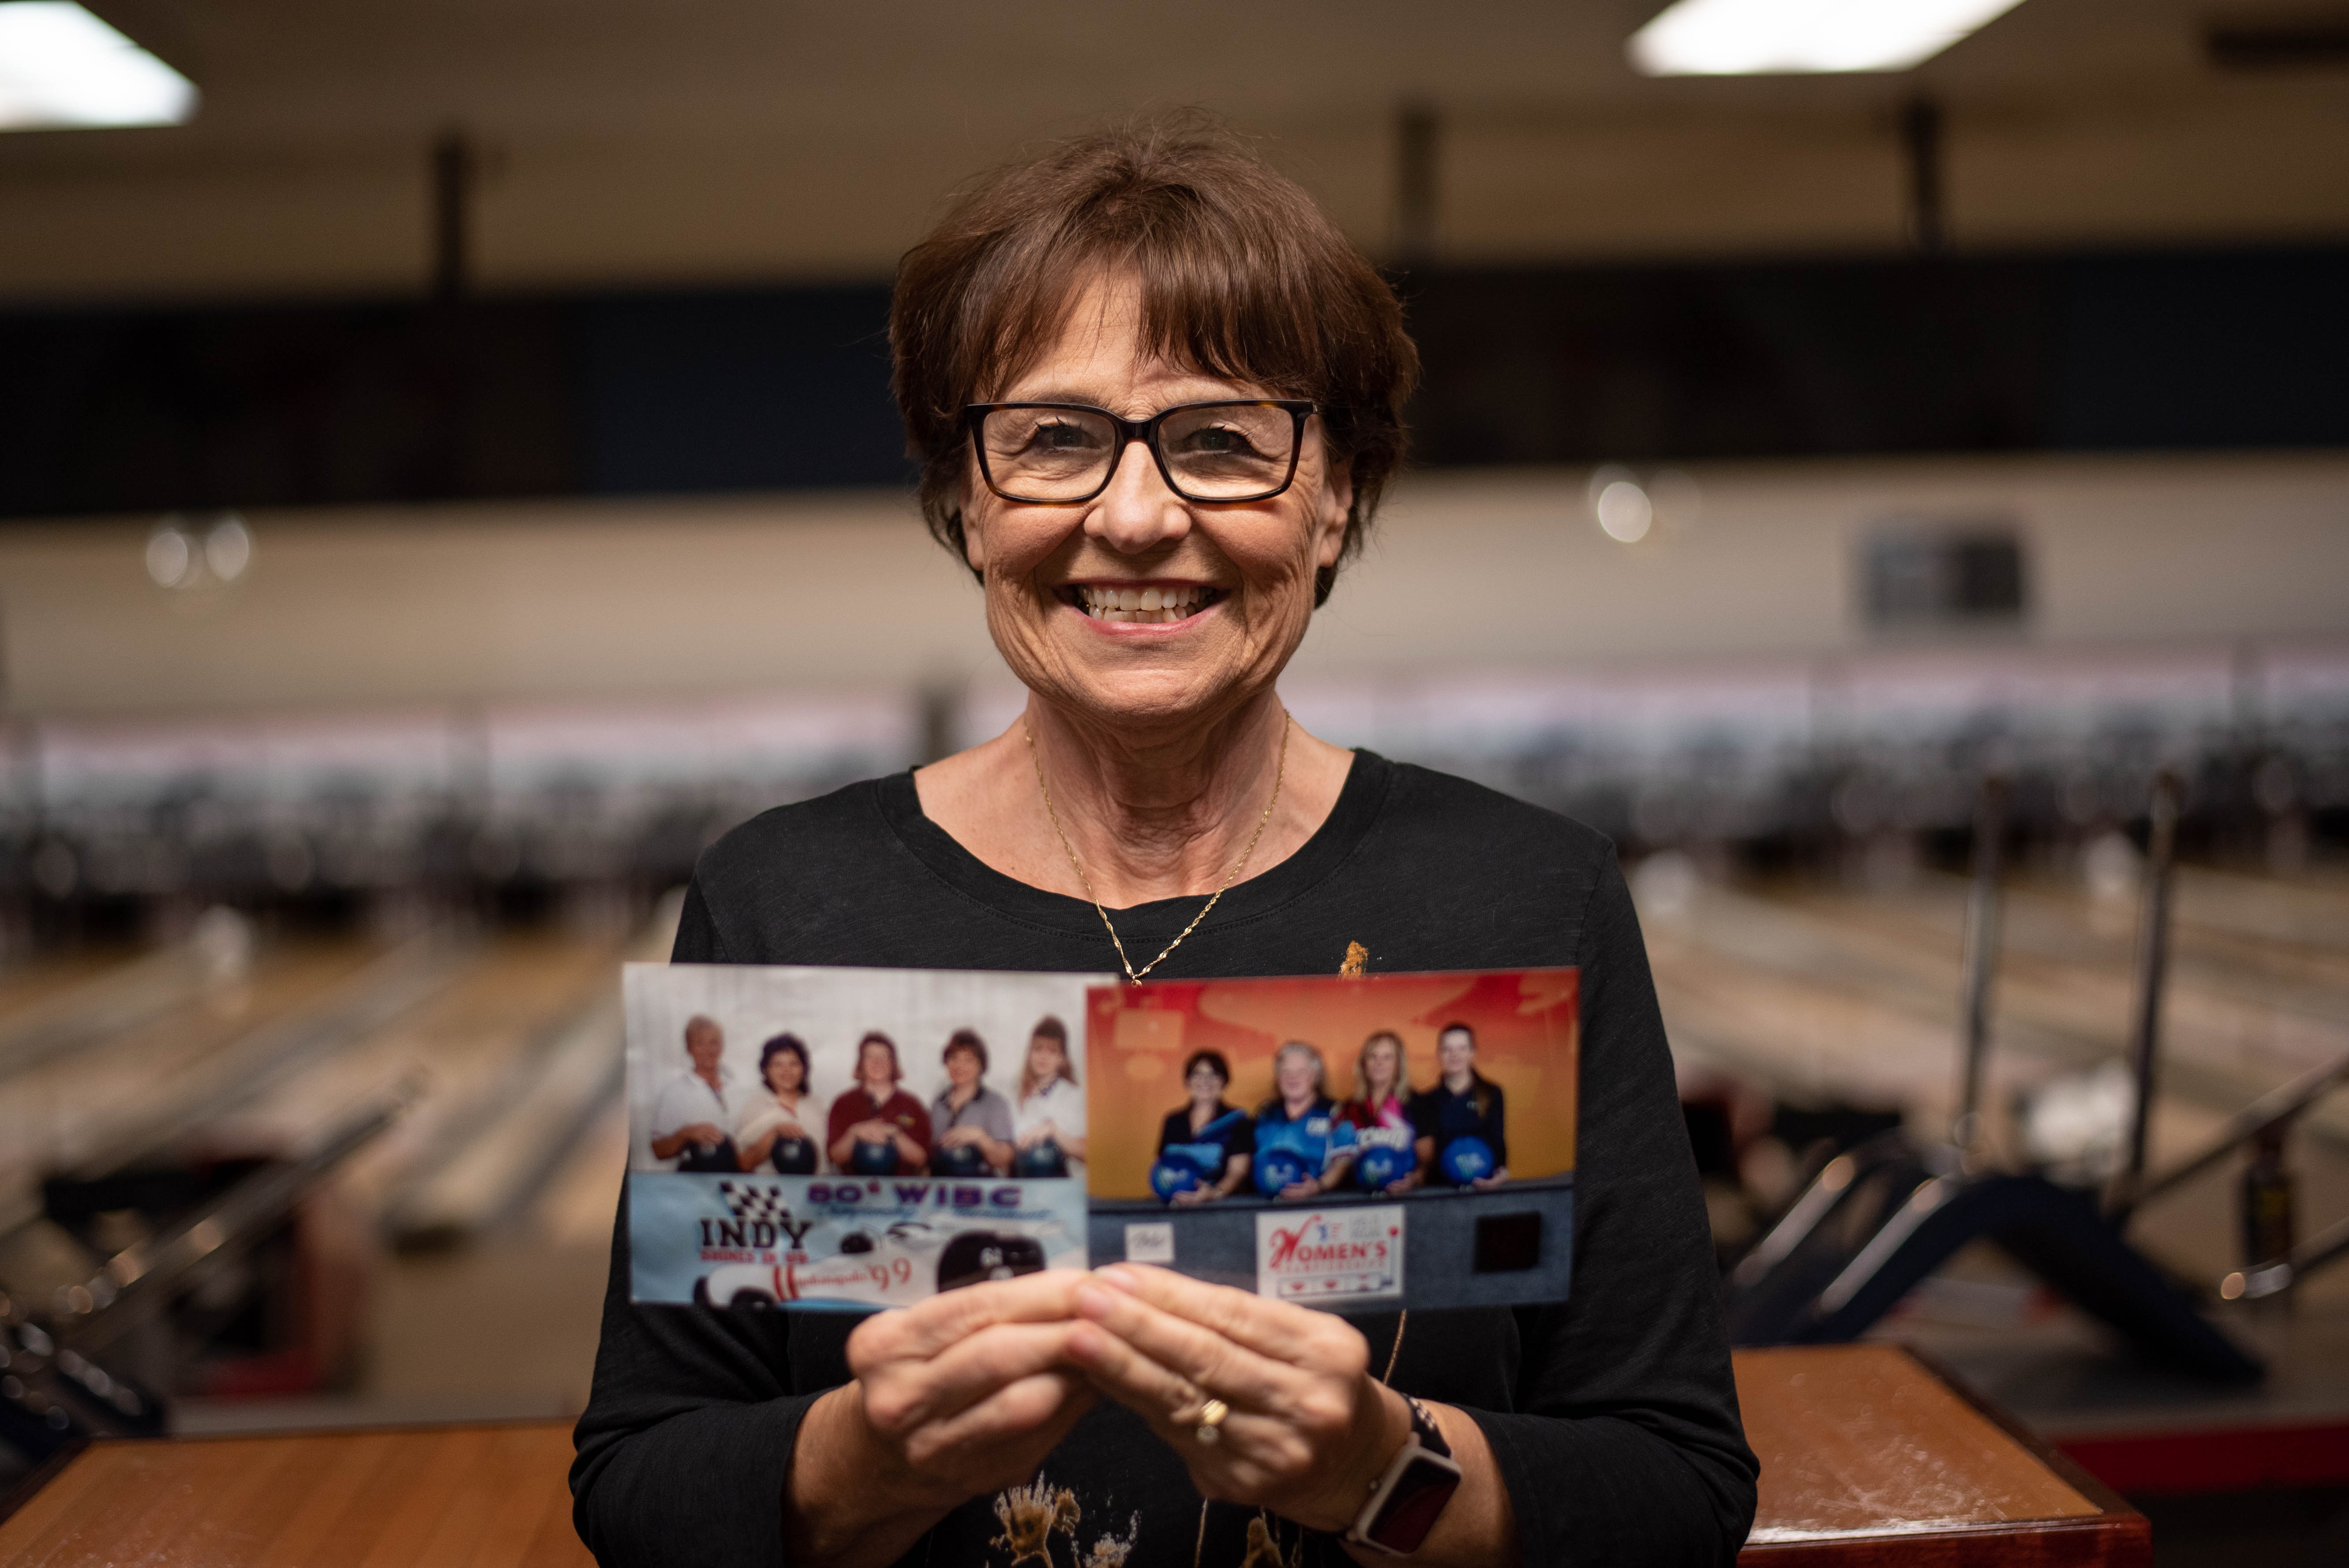 In April, Barbara Demorest of Bellingham reunited with two friends from her 1999 nationals team, left photo, to bowl in this year’s International Golden Ladies Classic in Las Vegas.